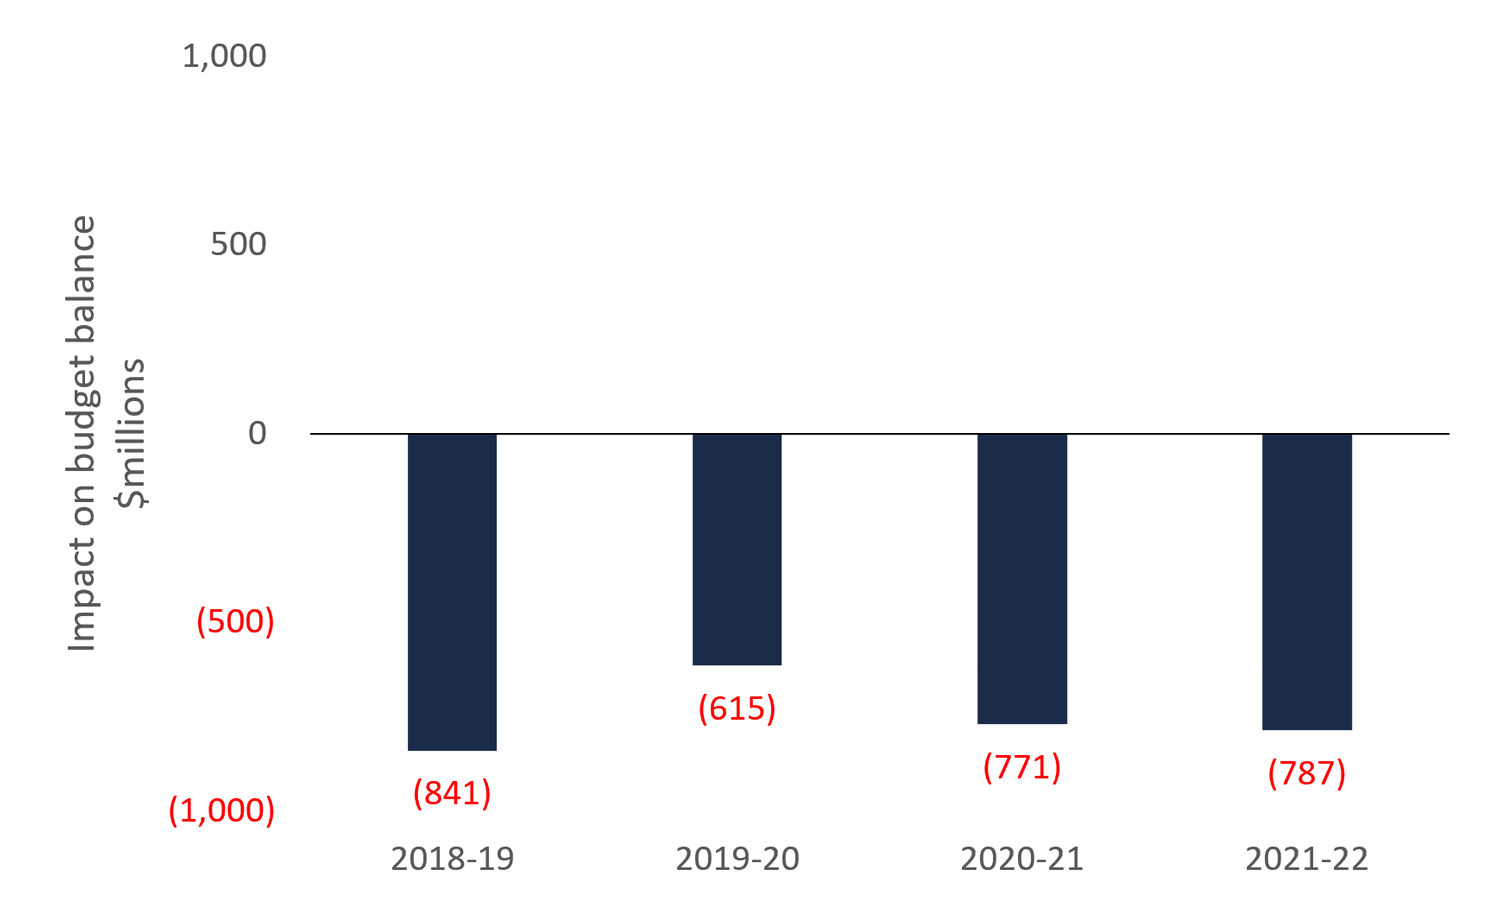 Estimated impact on the Province’s budget balance from ending the cap and trade program, 2018-19 to 2021-22